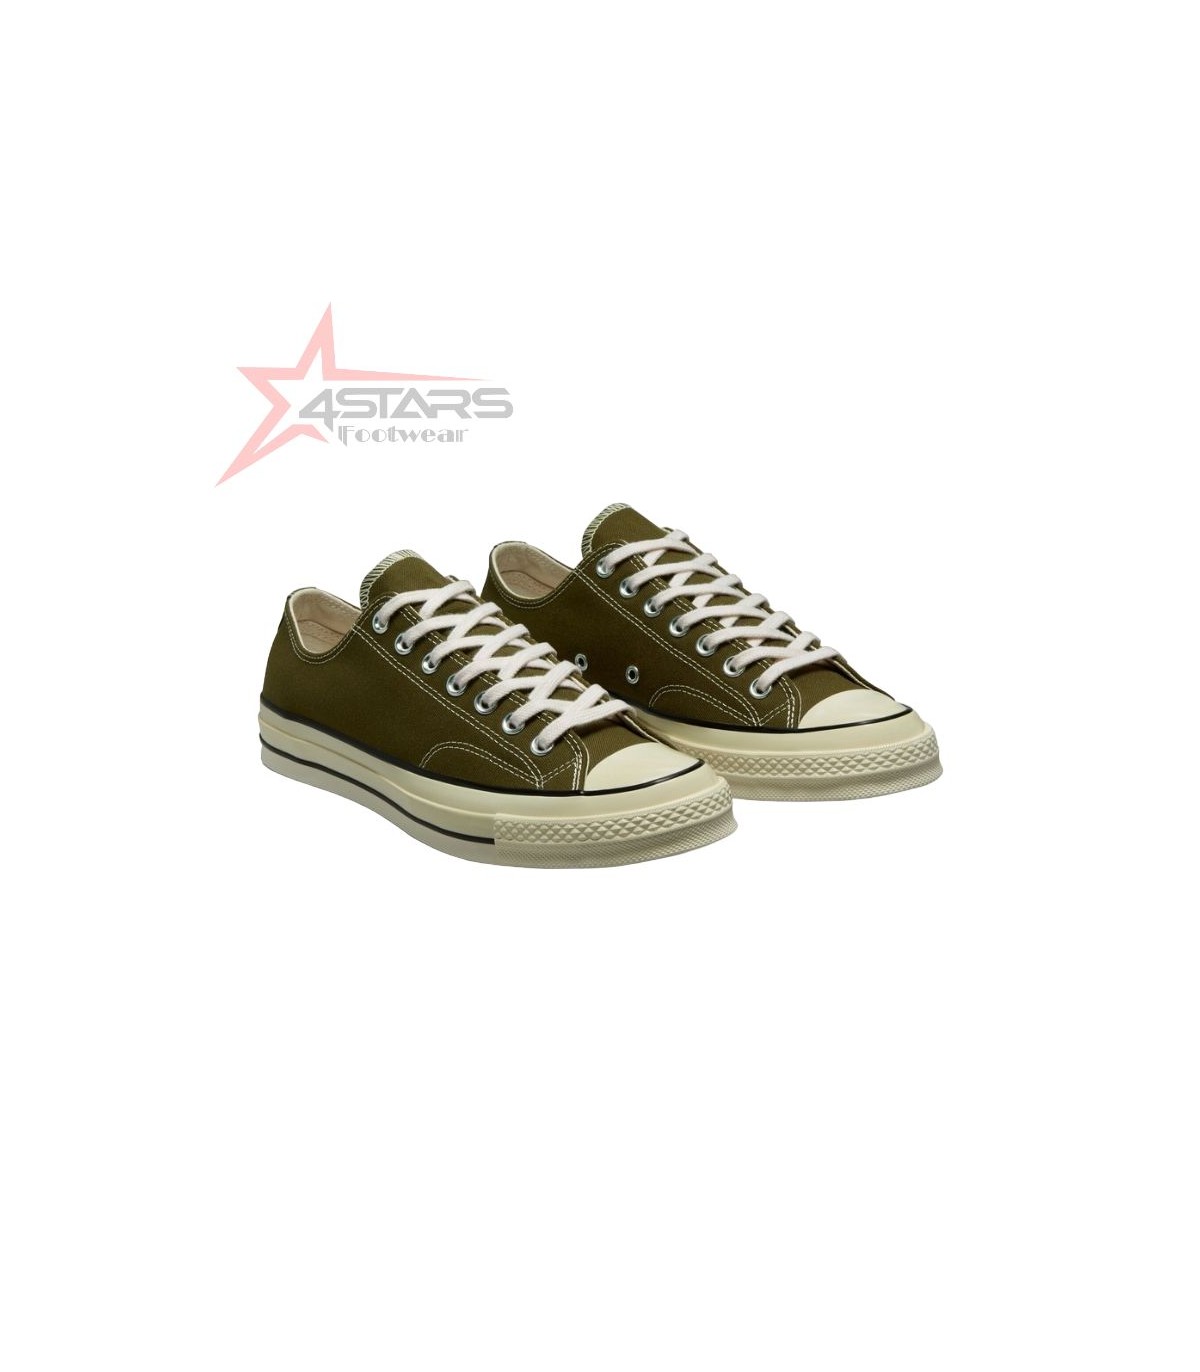 Converse Chuck 70 Classic Low - Olive Green